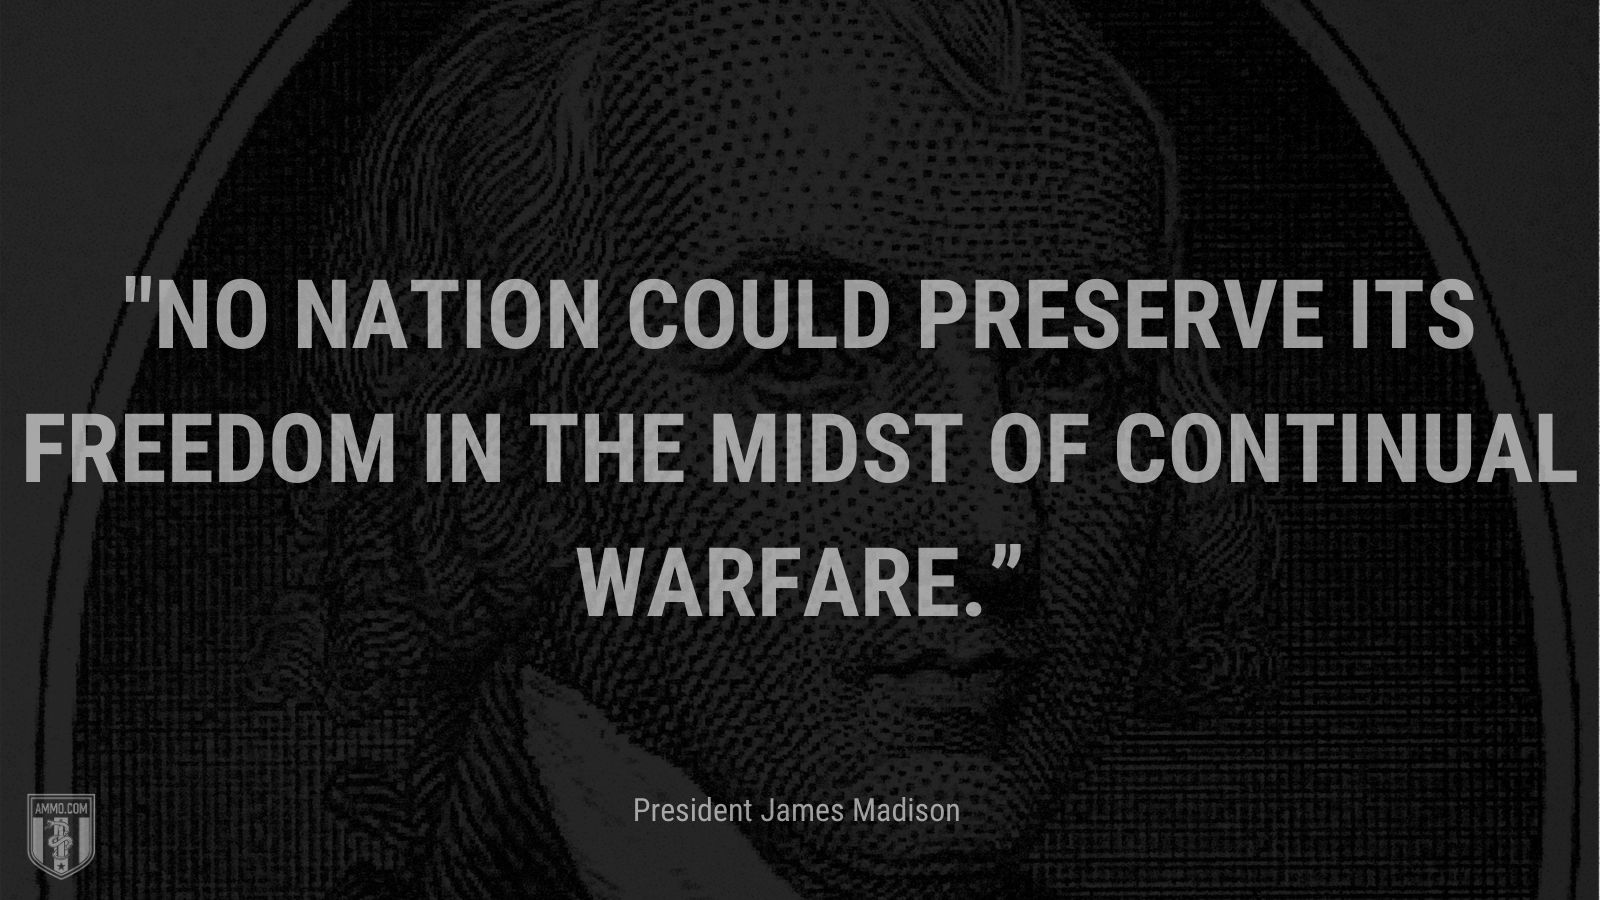 “No nation could preserve its freedom in the midst of continual warfare.” - President James Madison 